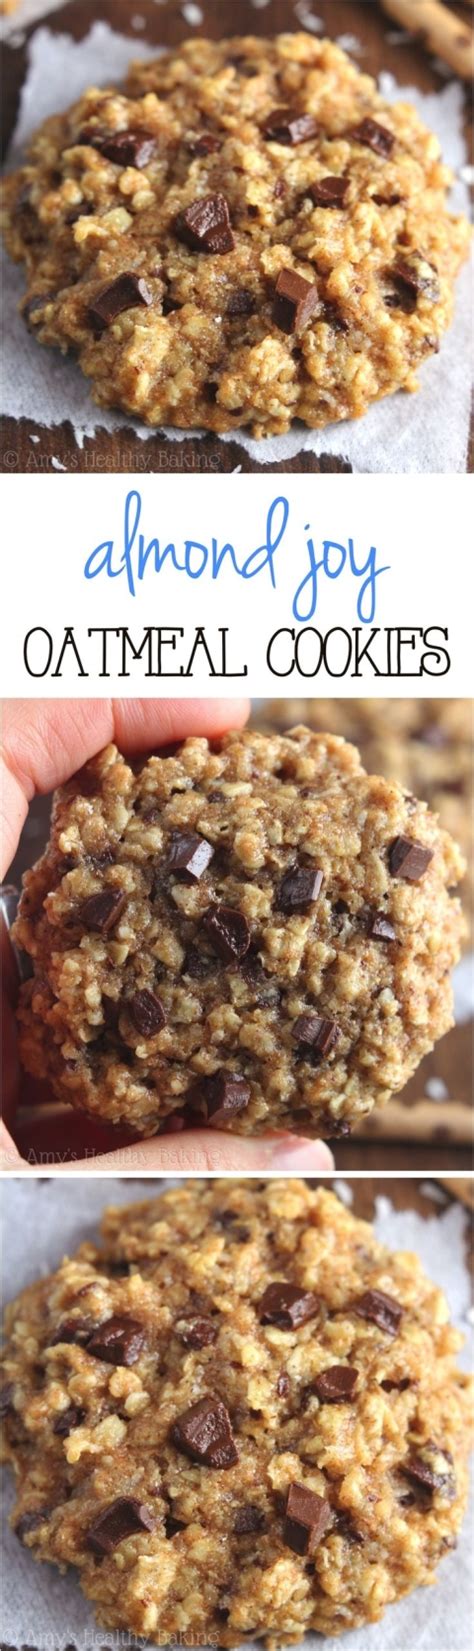 The beauty of this oatmeal cookie recipe is you can really get creative with ingredients! Almond Joy Oatmeal Cookies Recipe | Dessert recipes ...